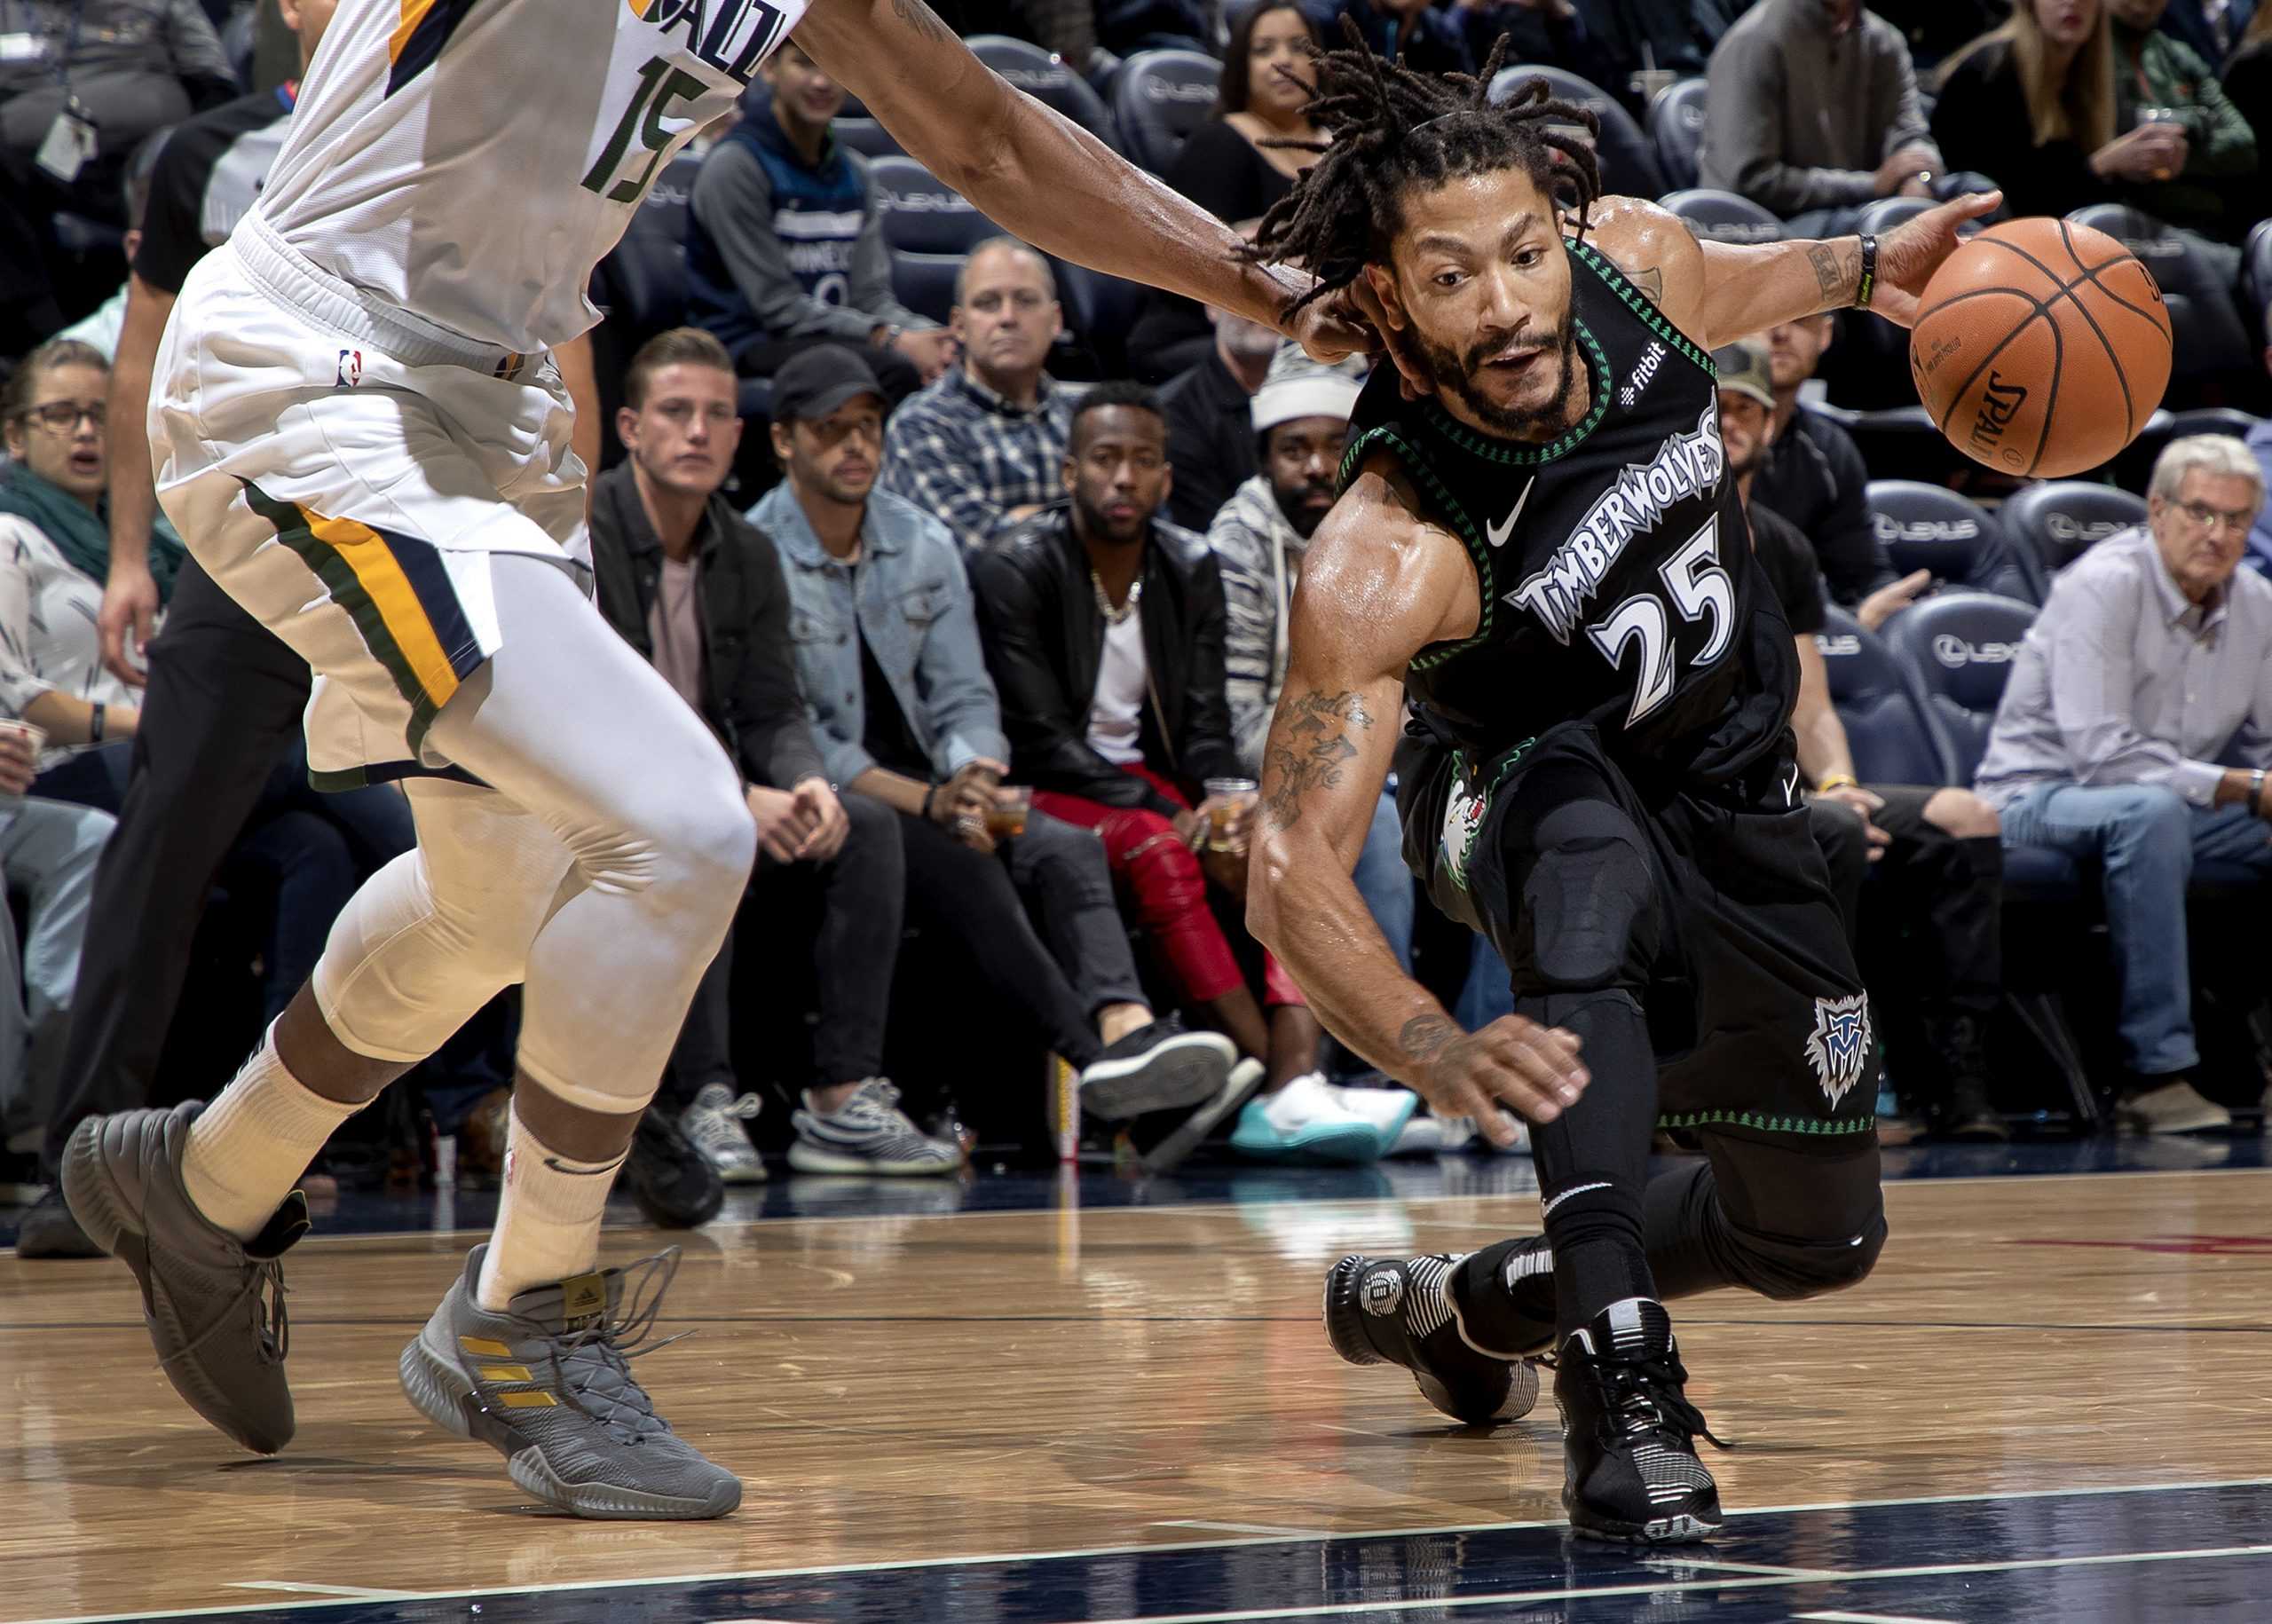 The Minnesota Timberwolves Derrick Rose drives the lane in the third quarter against the Utah Jazz at the Target Center in Minneapolis on Wednesday, Oct. 31, 2018. The Timberwolves won, 128-125, behind a career-high 50 points from Rose. (Carlos Gonzalez/Minneapolis Star Tribune/TNS)